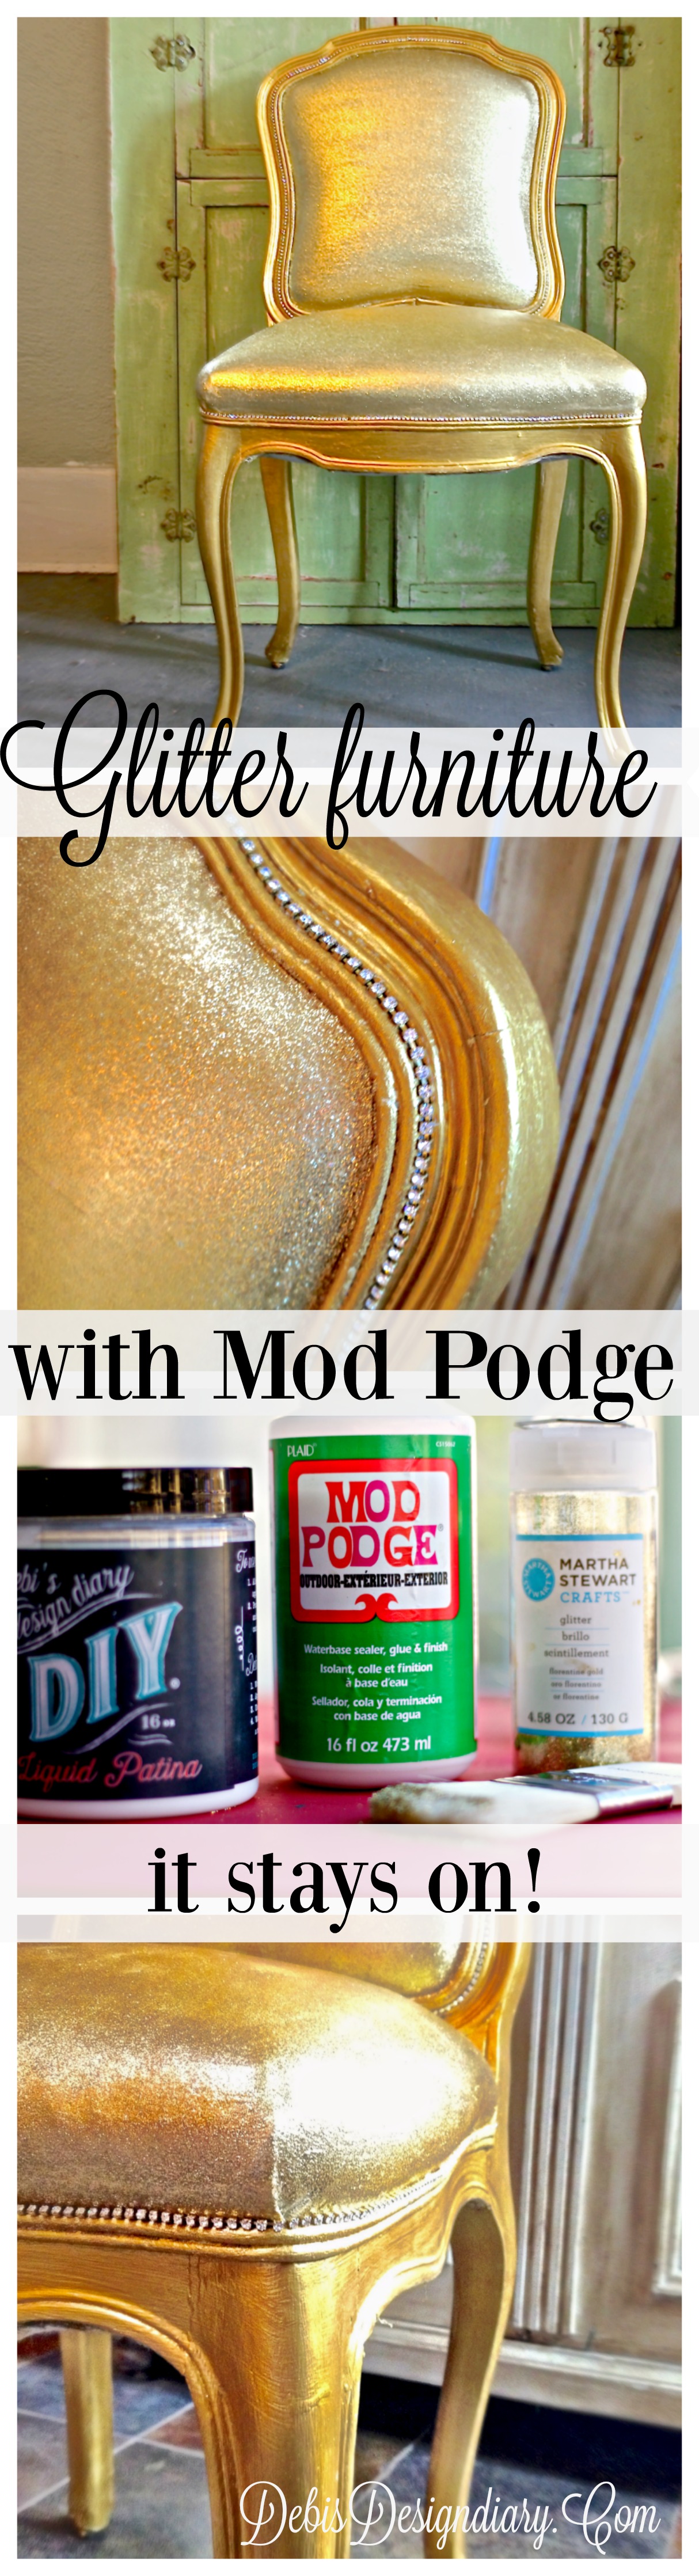 How to glitter upholstery without cracking or glitter rubbing off with Mod Podge